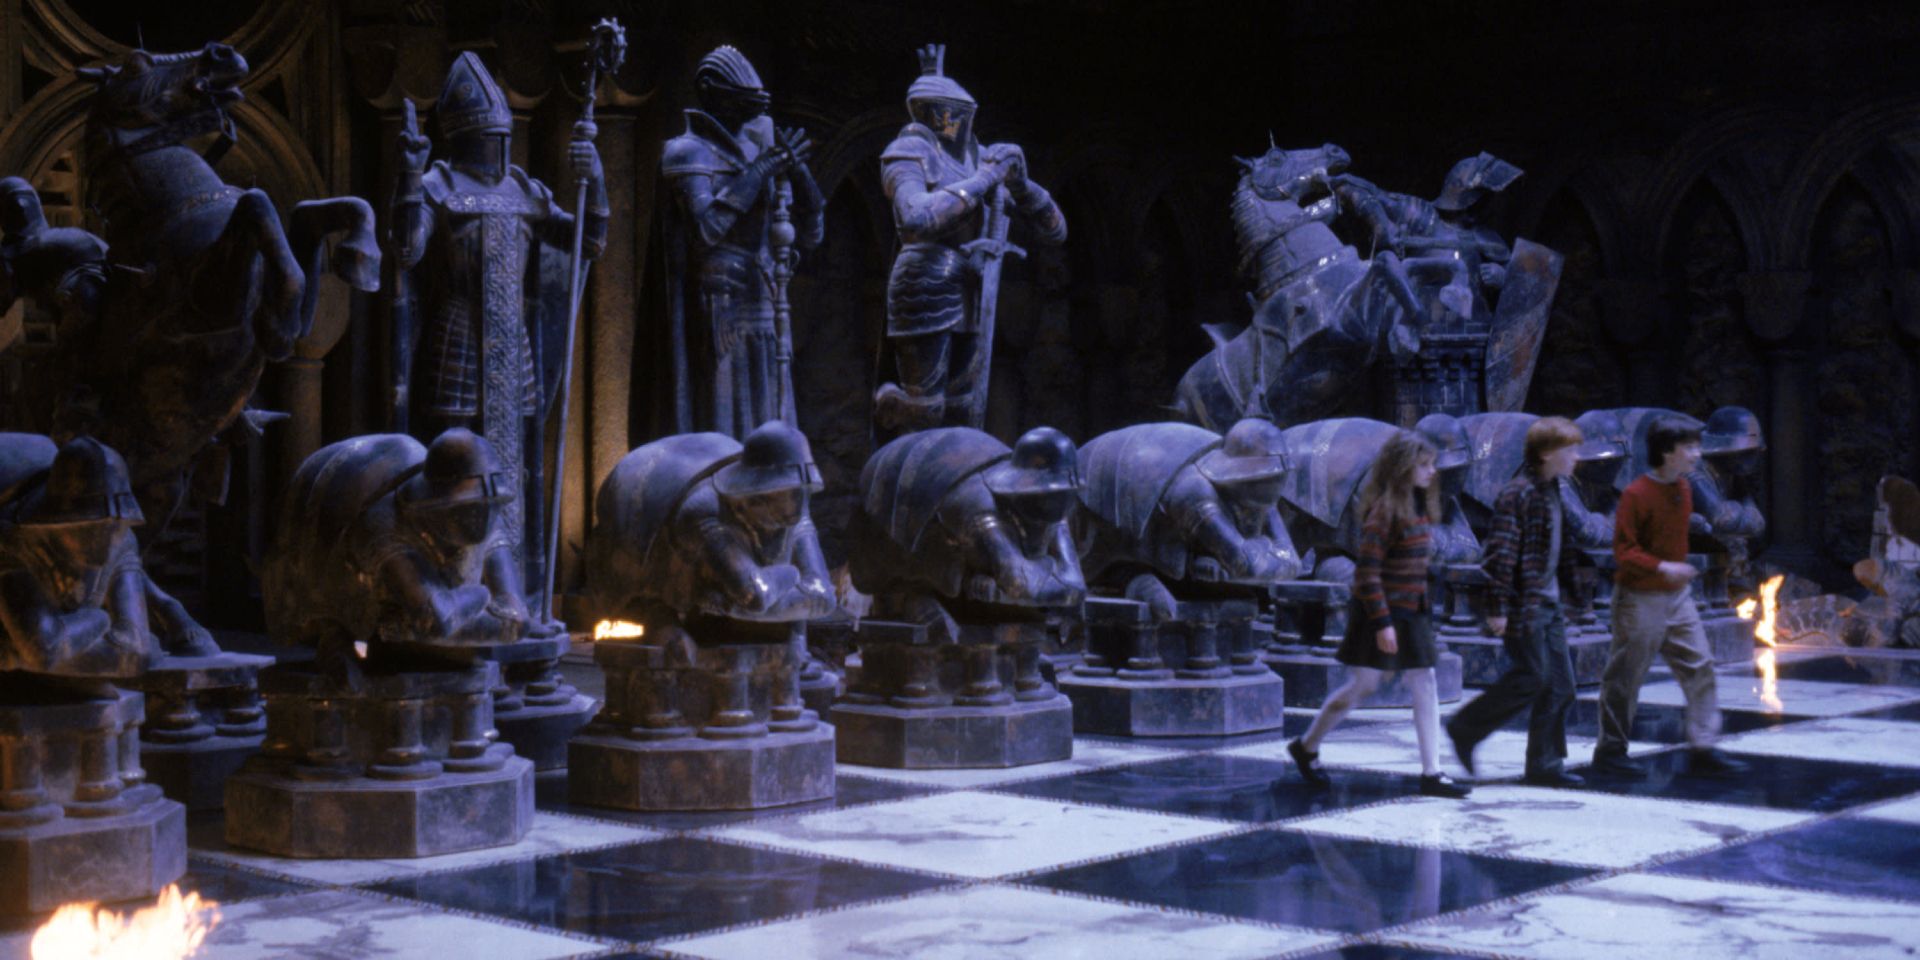 The life-sized chess set in Harry Potter and the Sorcerer's Stone.